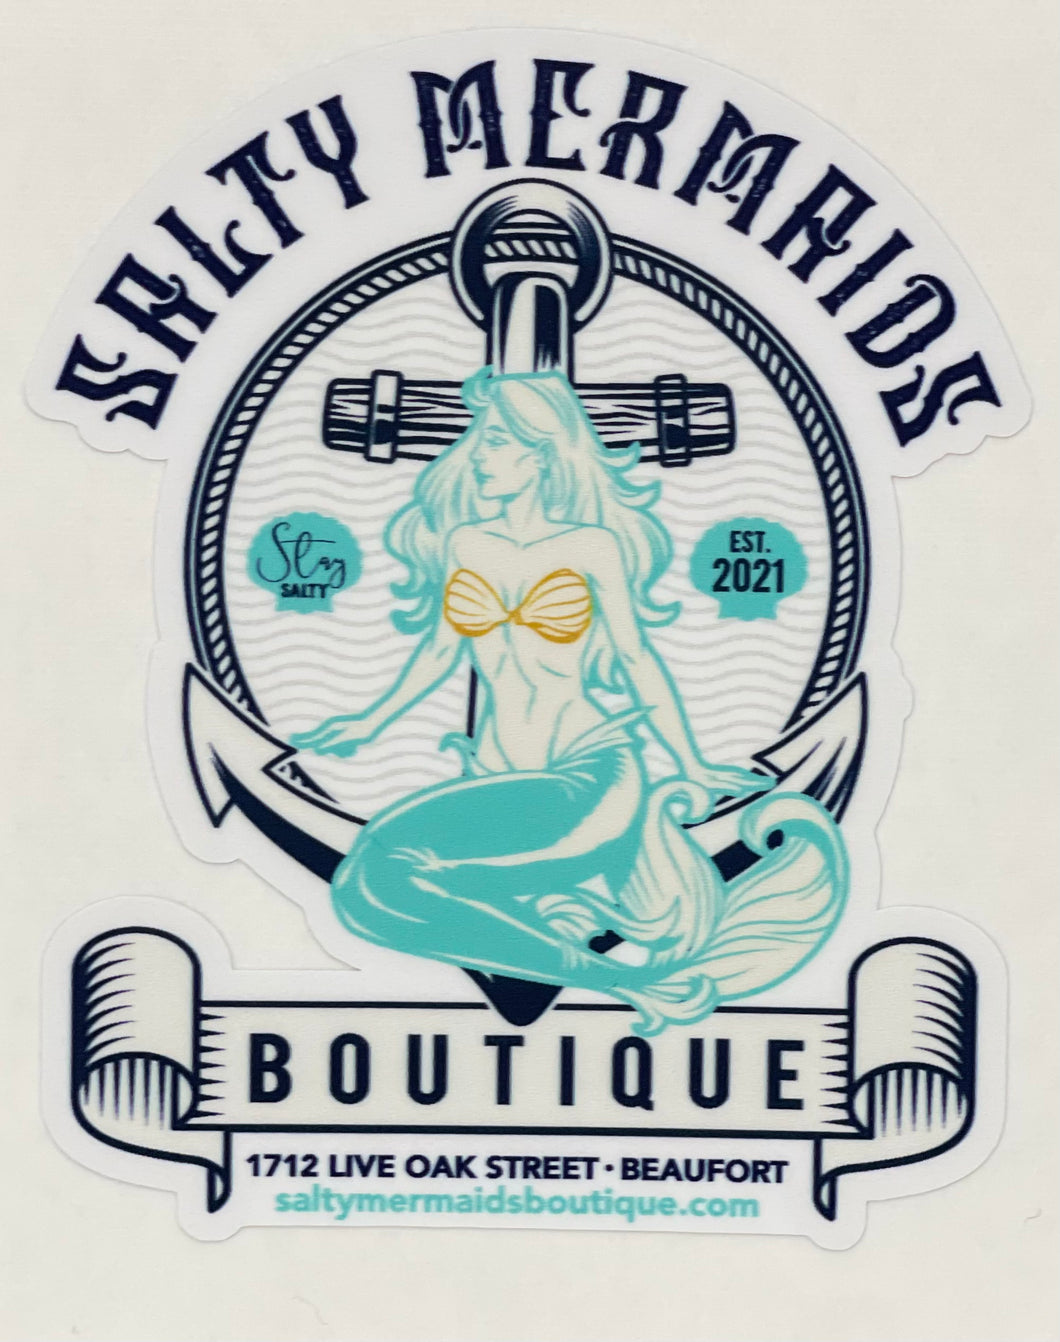 Salty Mermaids Boutique stickers